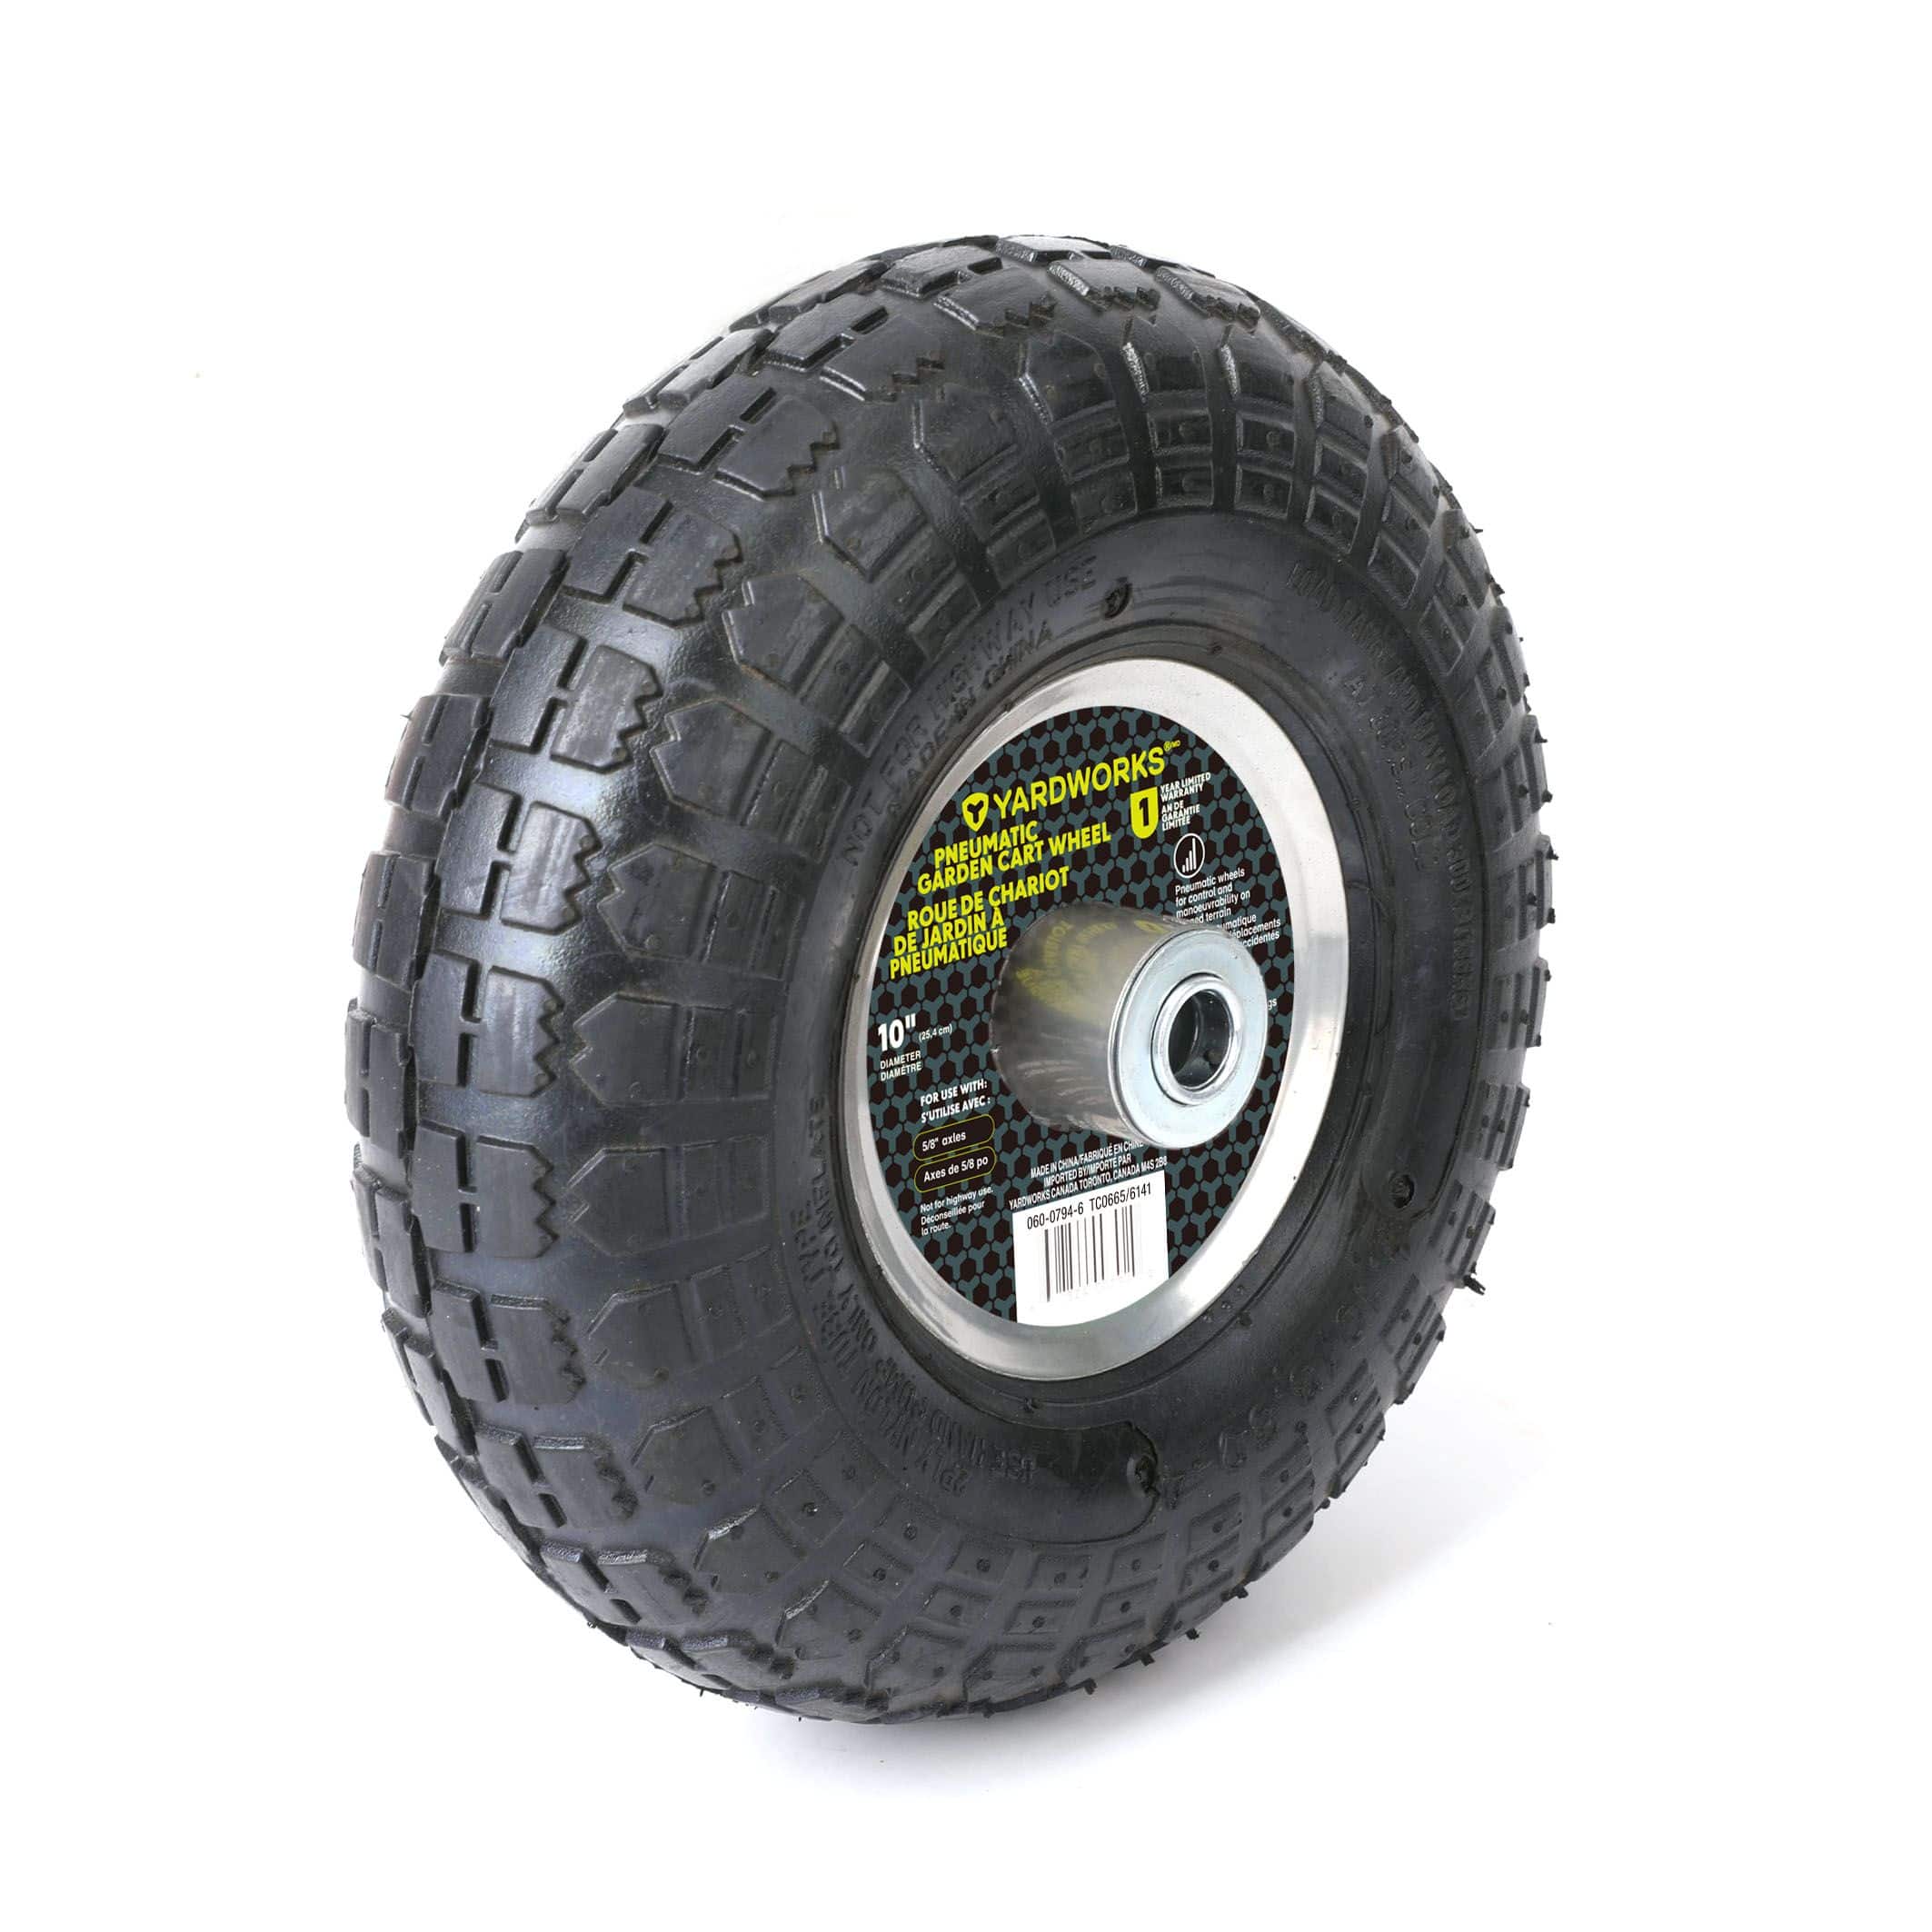 Replacement Cart Tire and Wheel